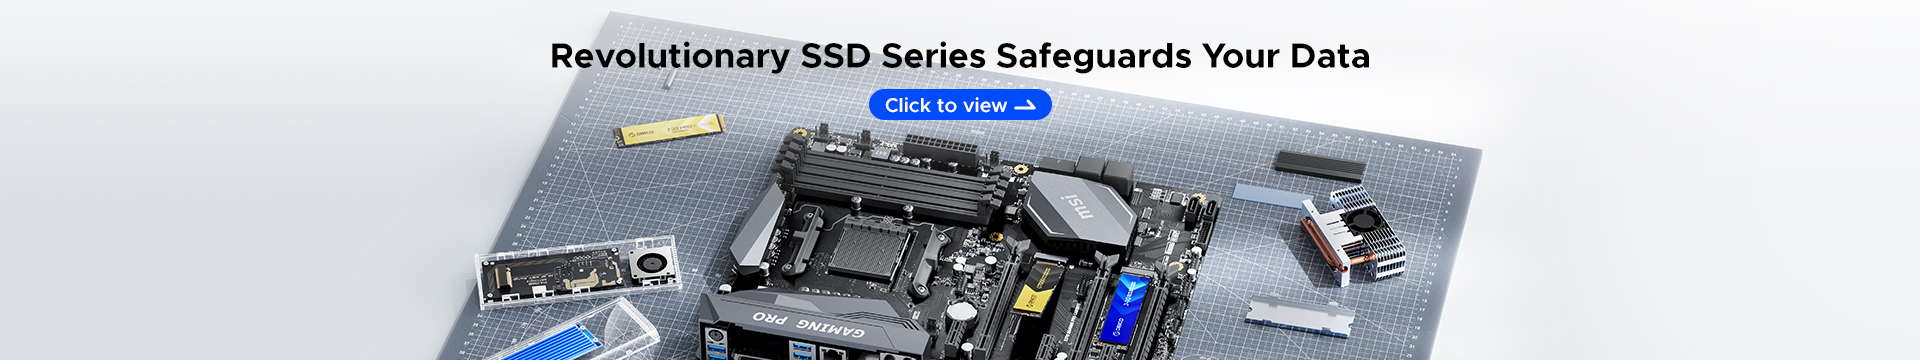 Revolutionary SSD Series Safeguards Your Data